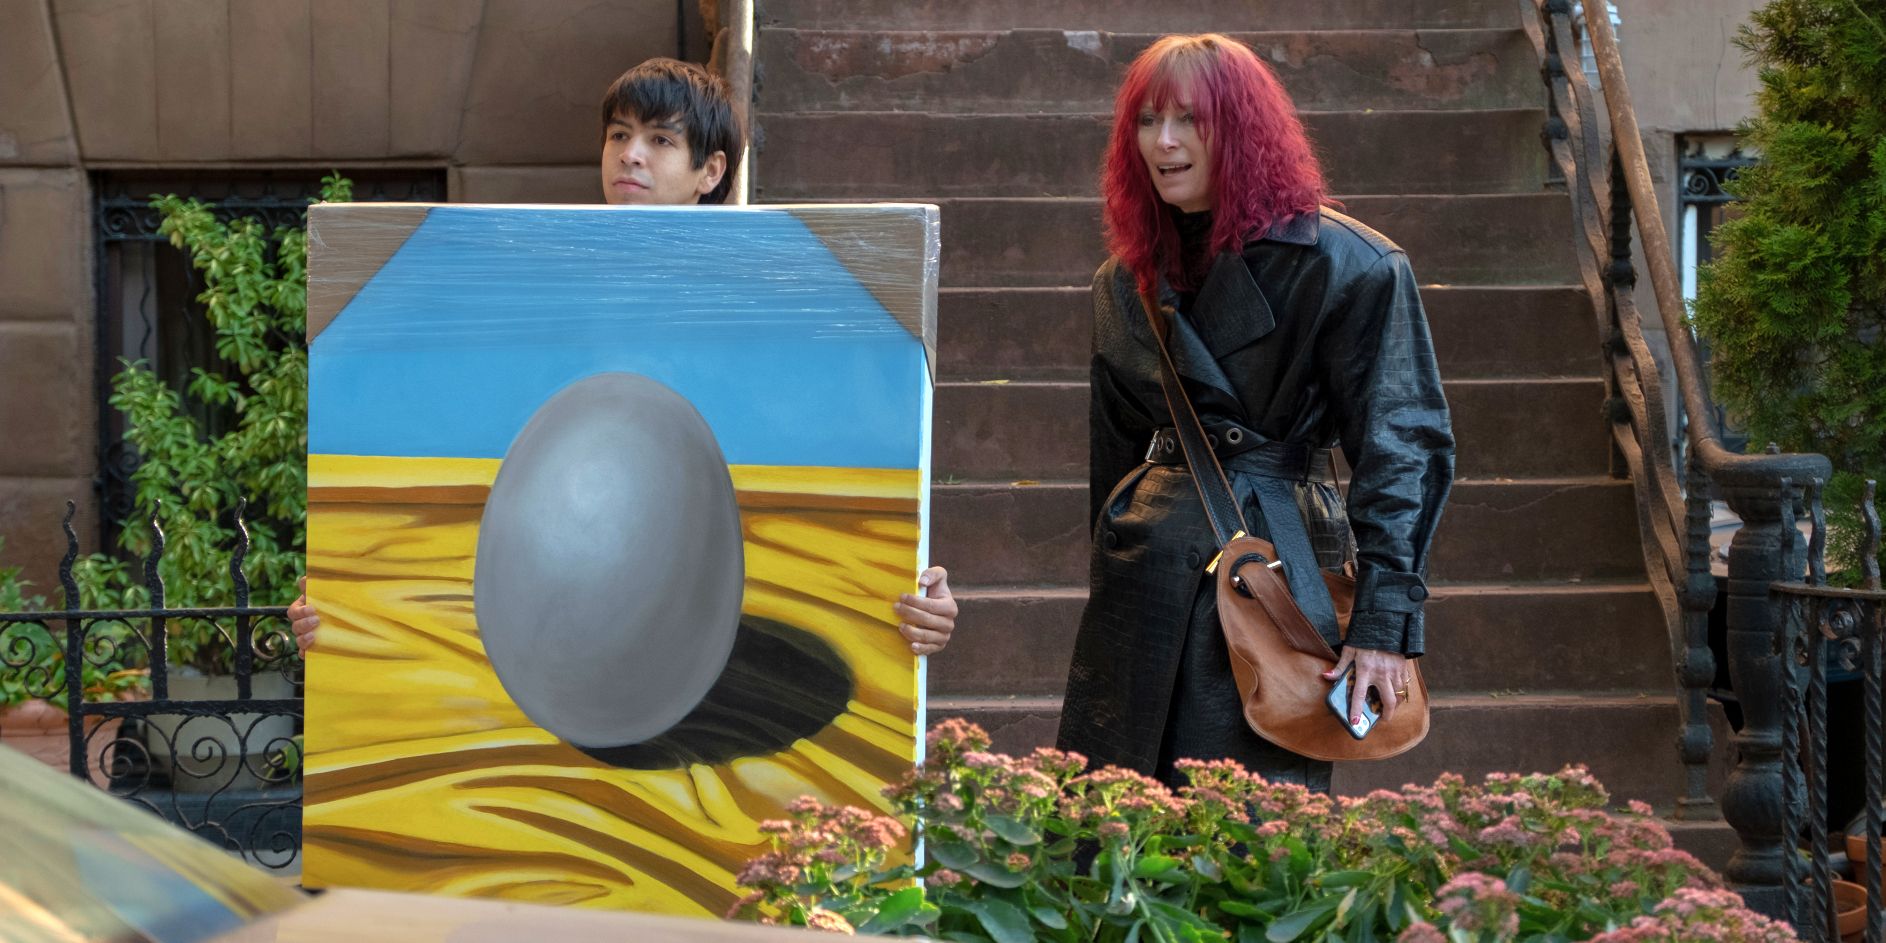 Alejandro carrying one of Bobby's egg paintings and standing next to Elizabeth in Problemista